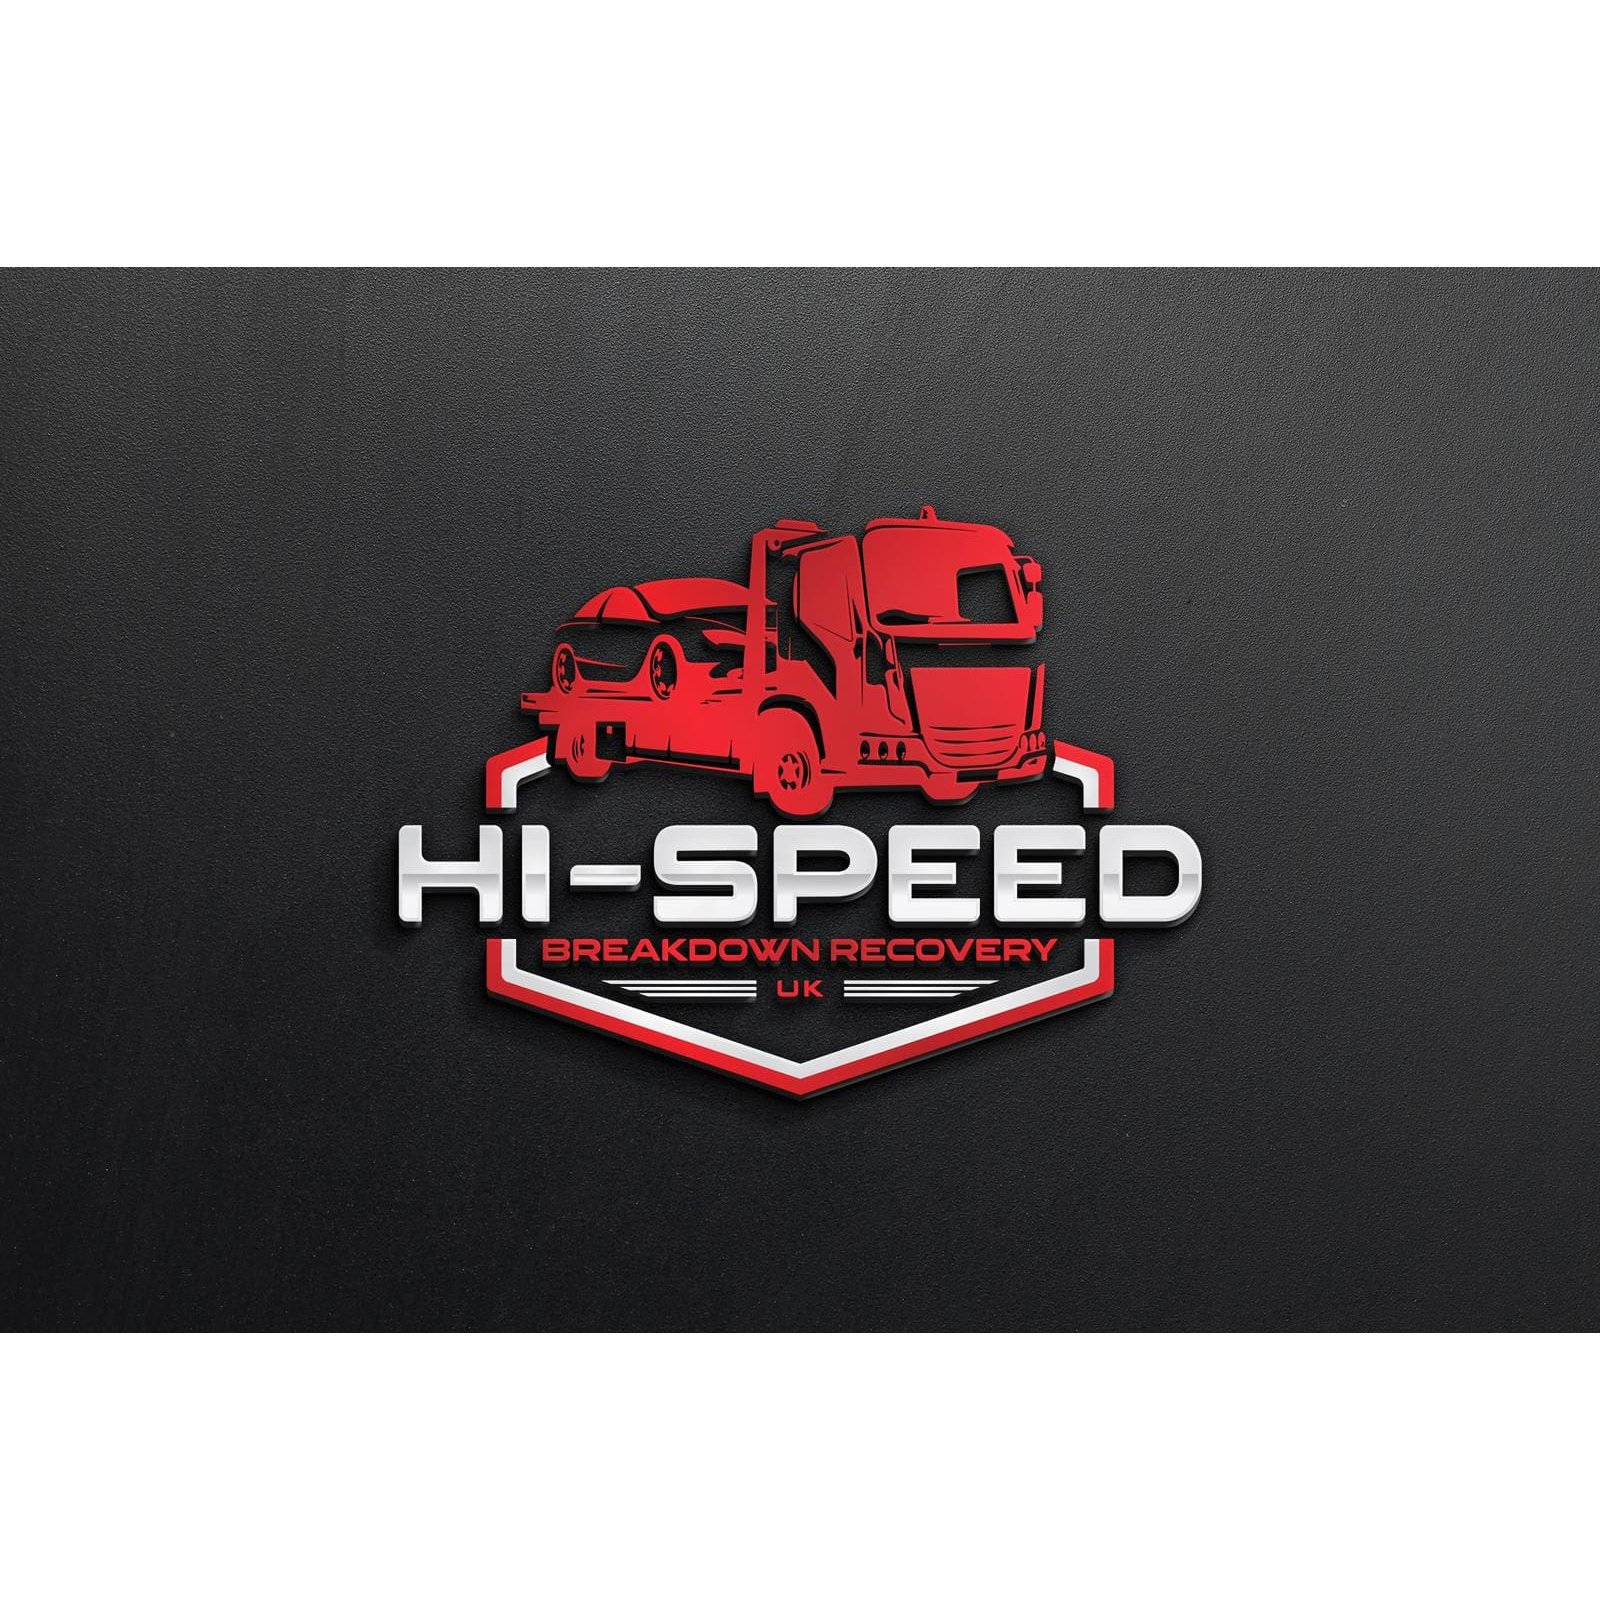 Hi-Speed Car Recovery - London, London E10 7AT - 07377 077005 | ShowMeLocal.com